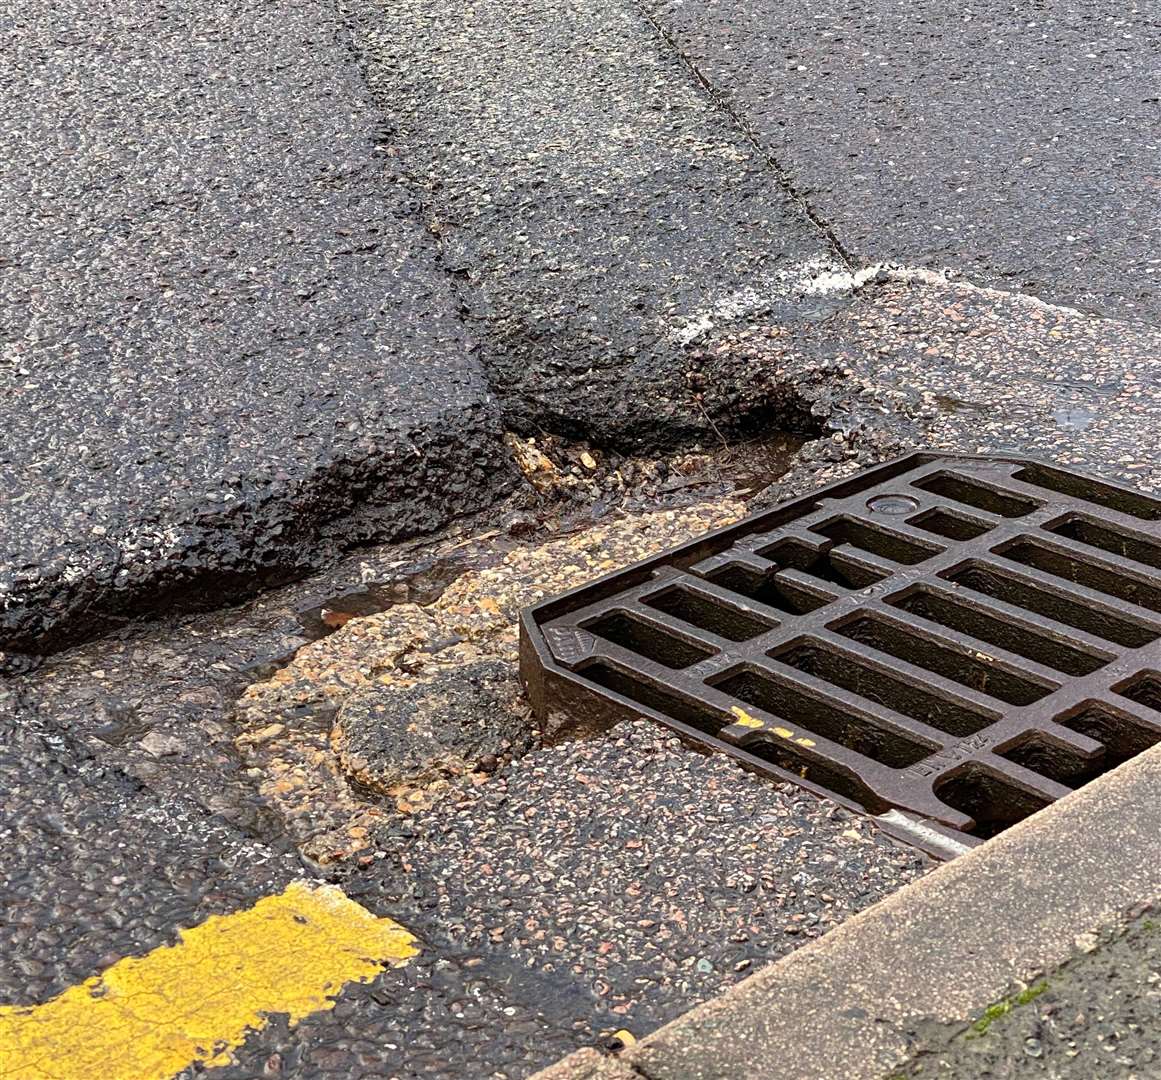 The potholes have been made worse by the recent poor weather. Photo: Sue Ferguson